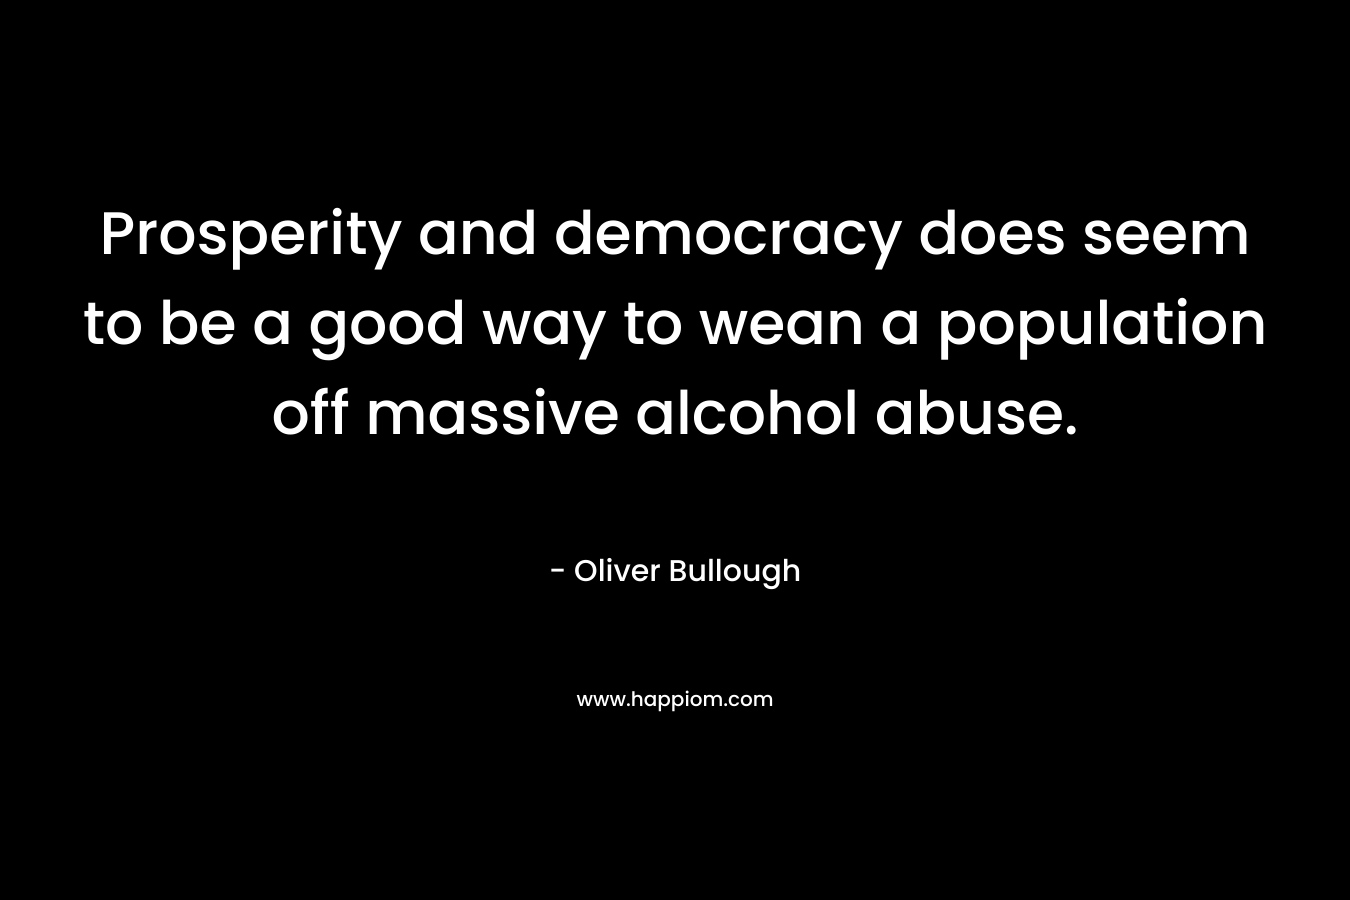 Prosperity and democracy does seem to be a good way to wean a population off massive alcohol abuse. – Oliver Bullough